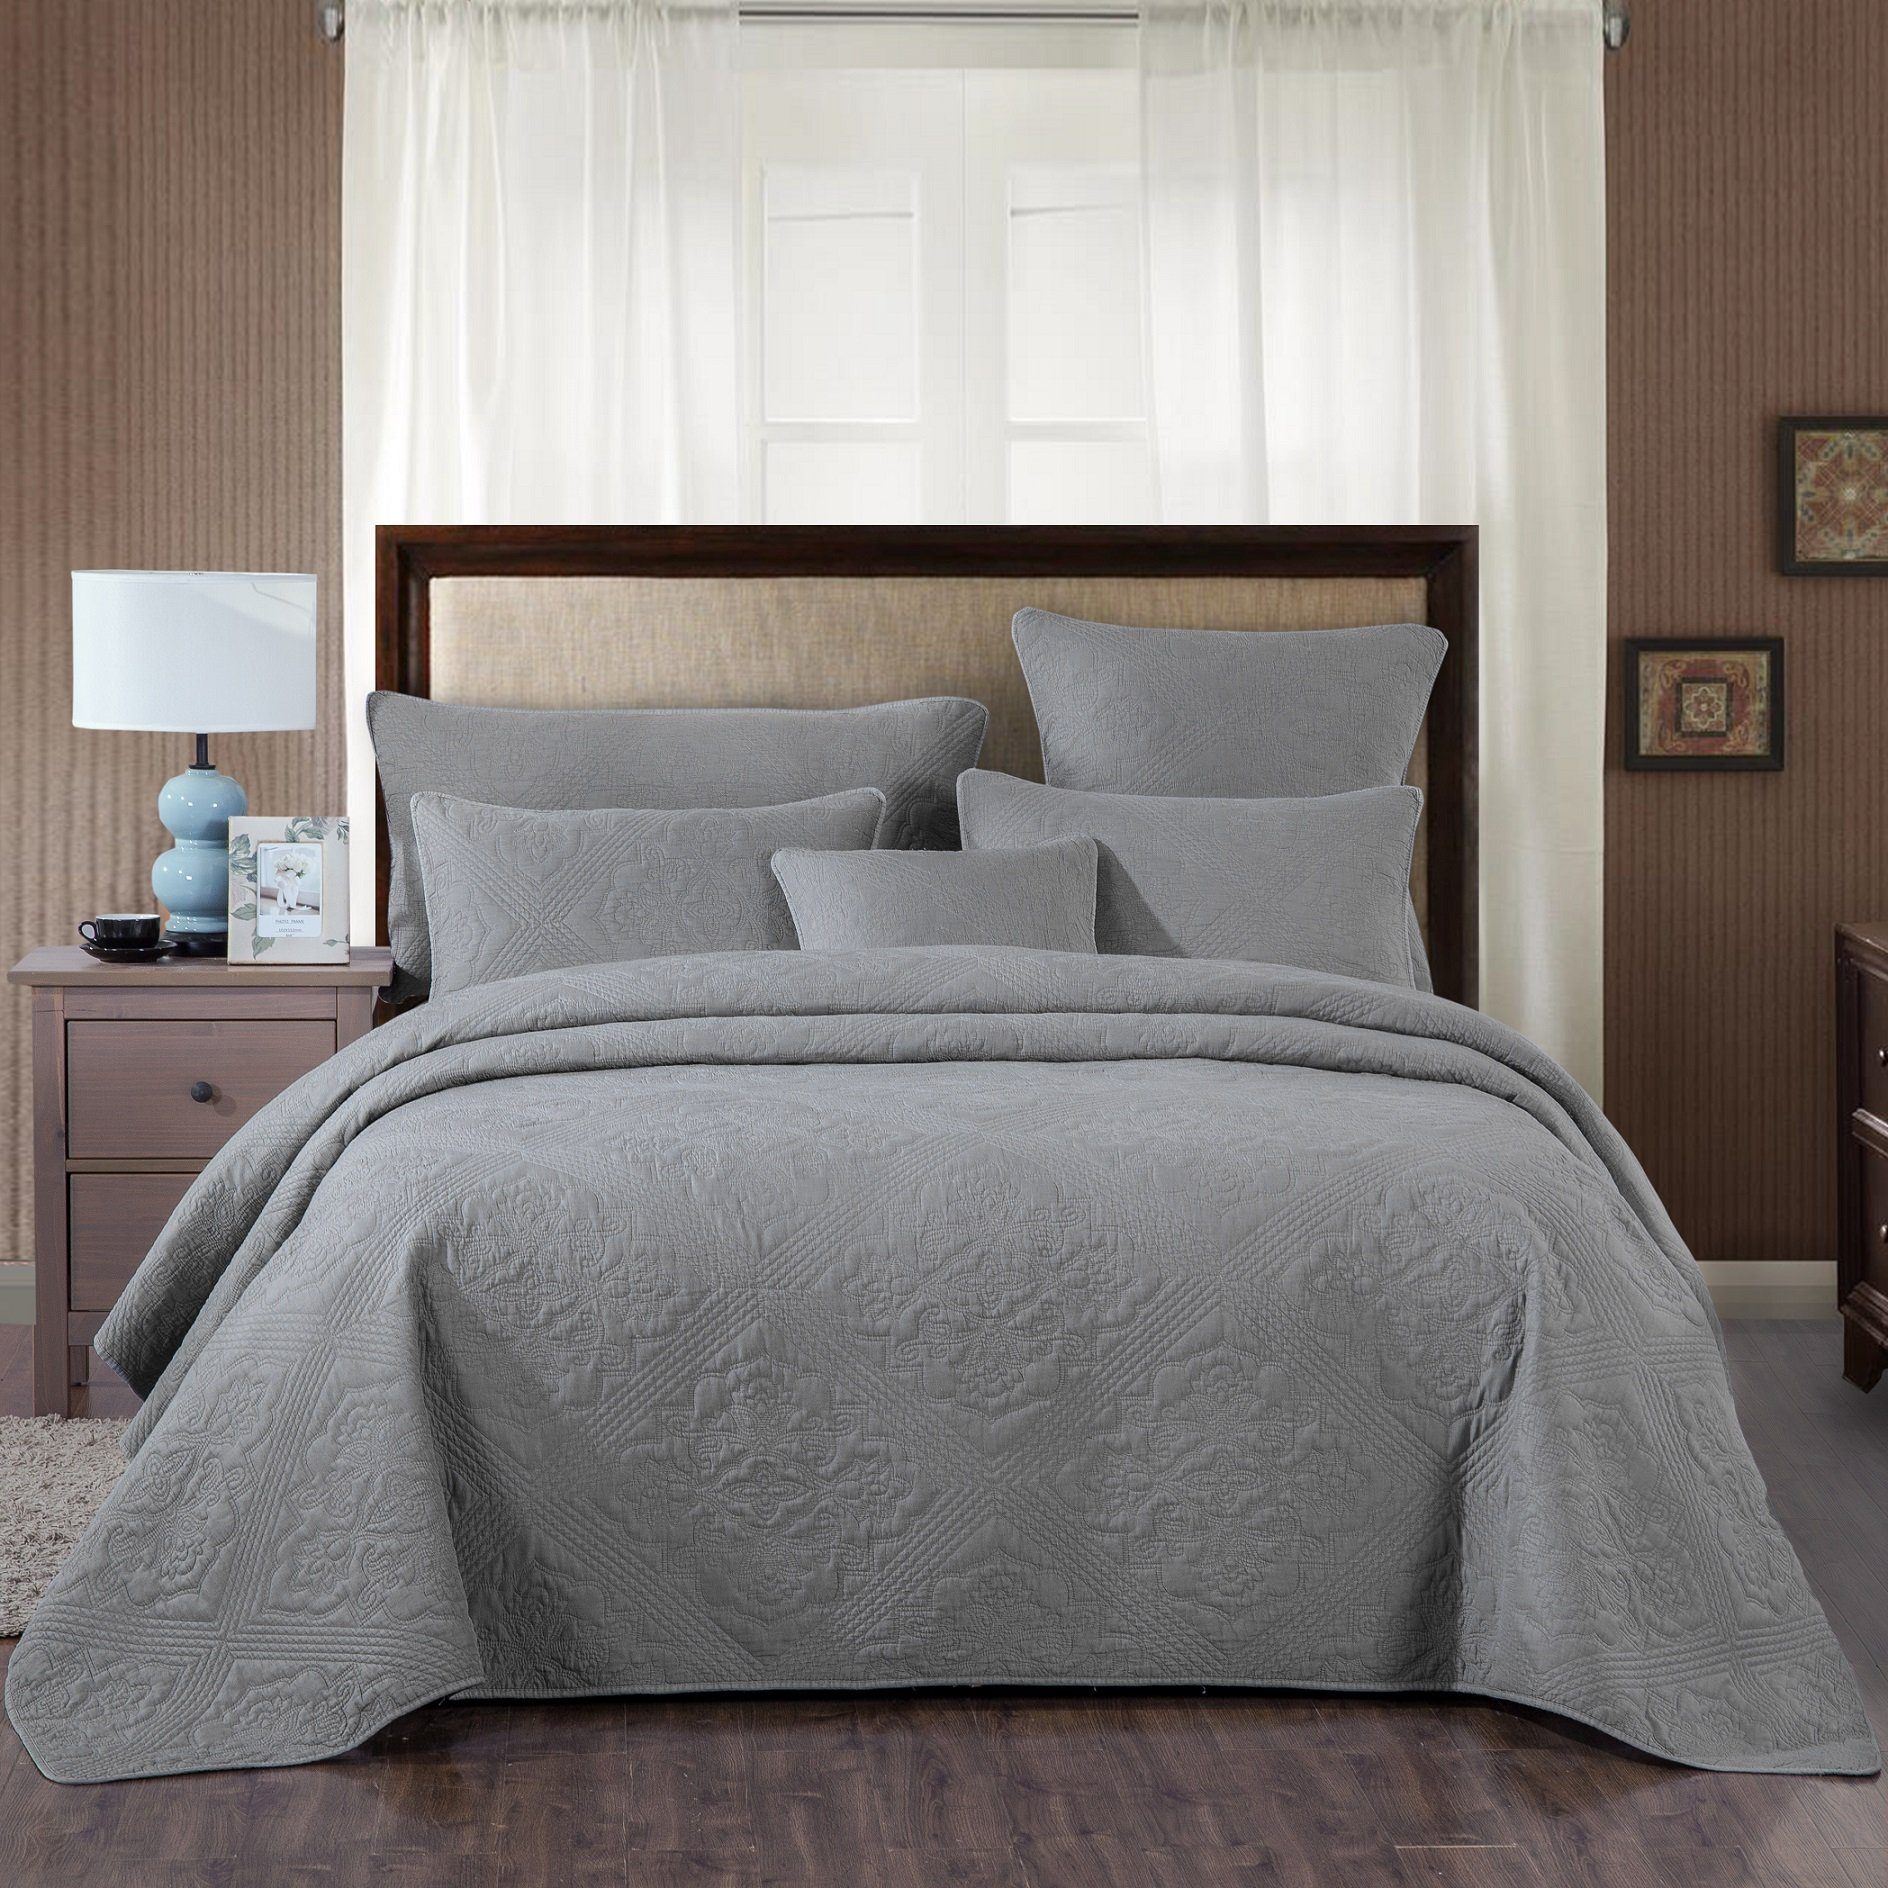 gray matelasse quilt bedspread and pillow covers in bedroom